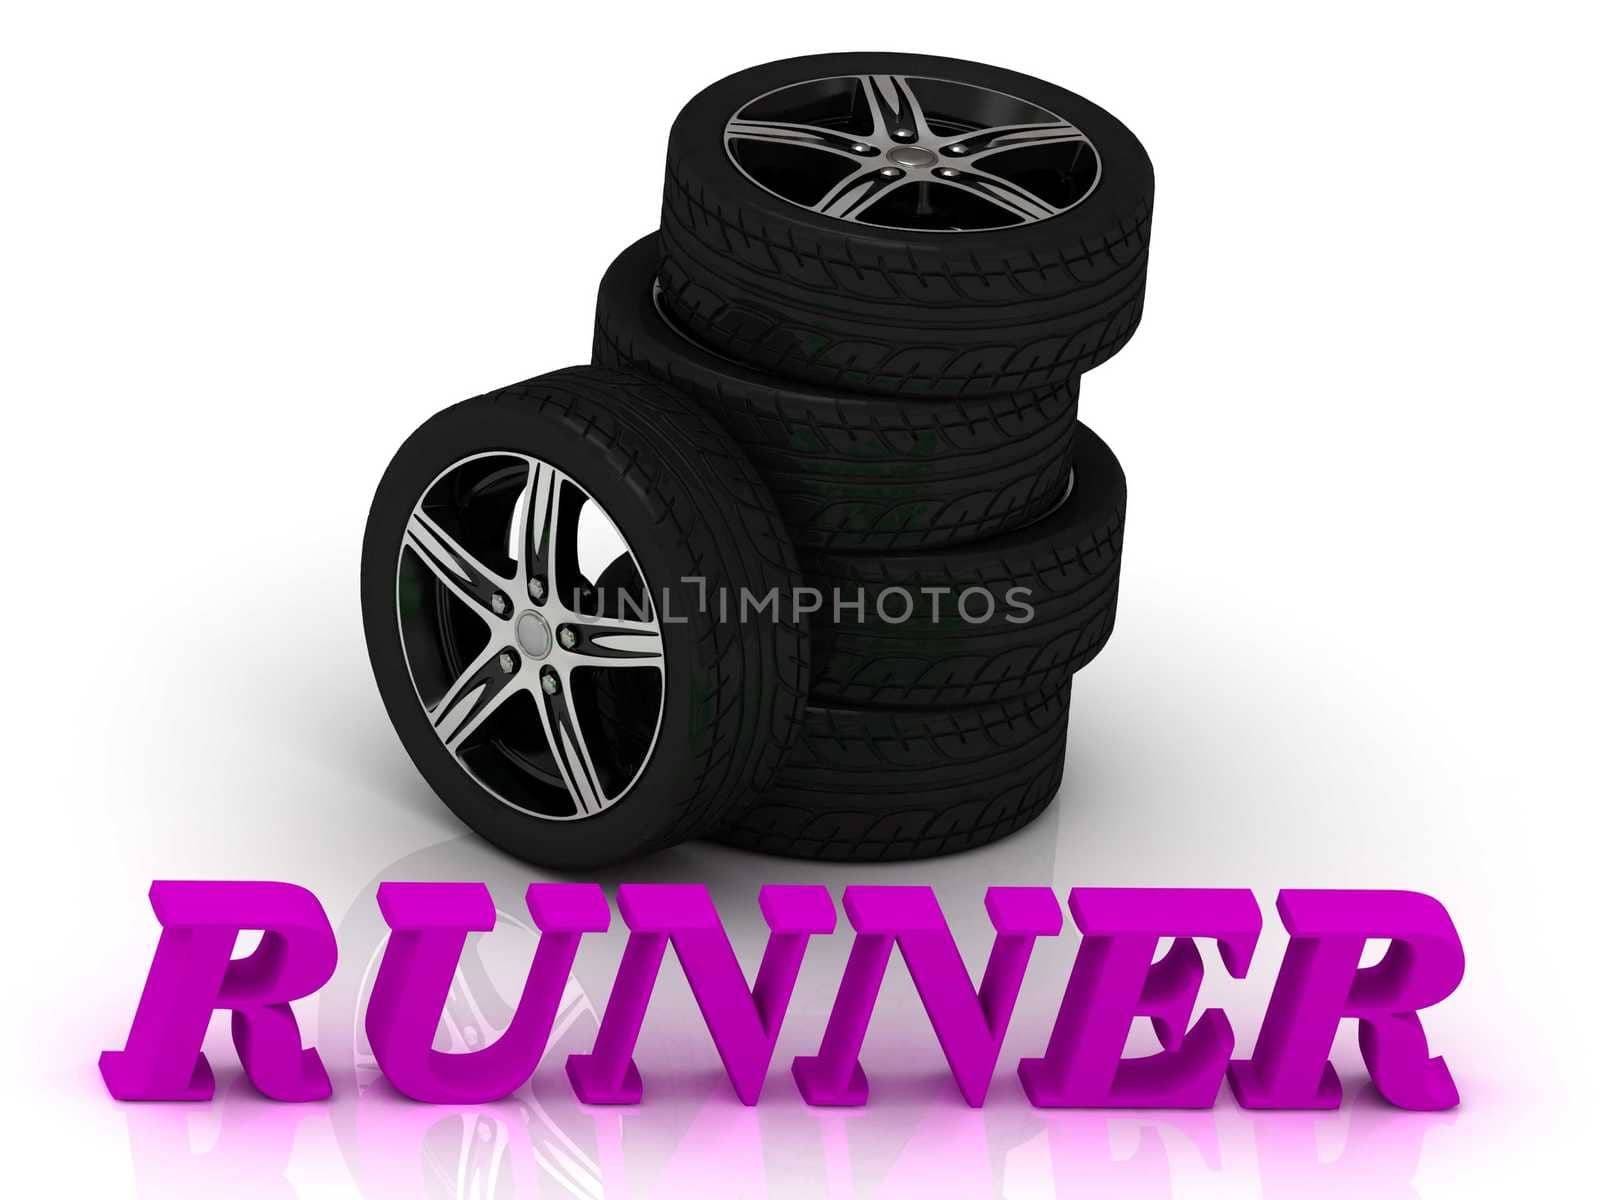 RUNNER- bright letters and rims mashine black wheels on a white background